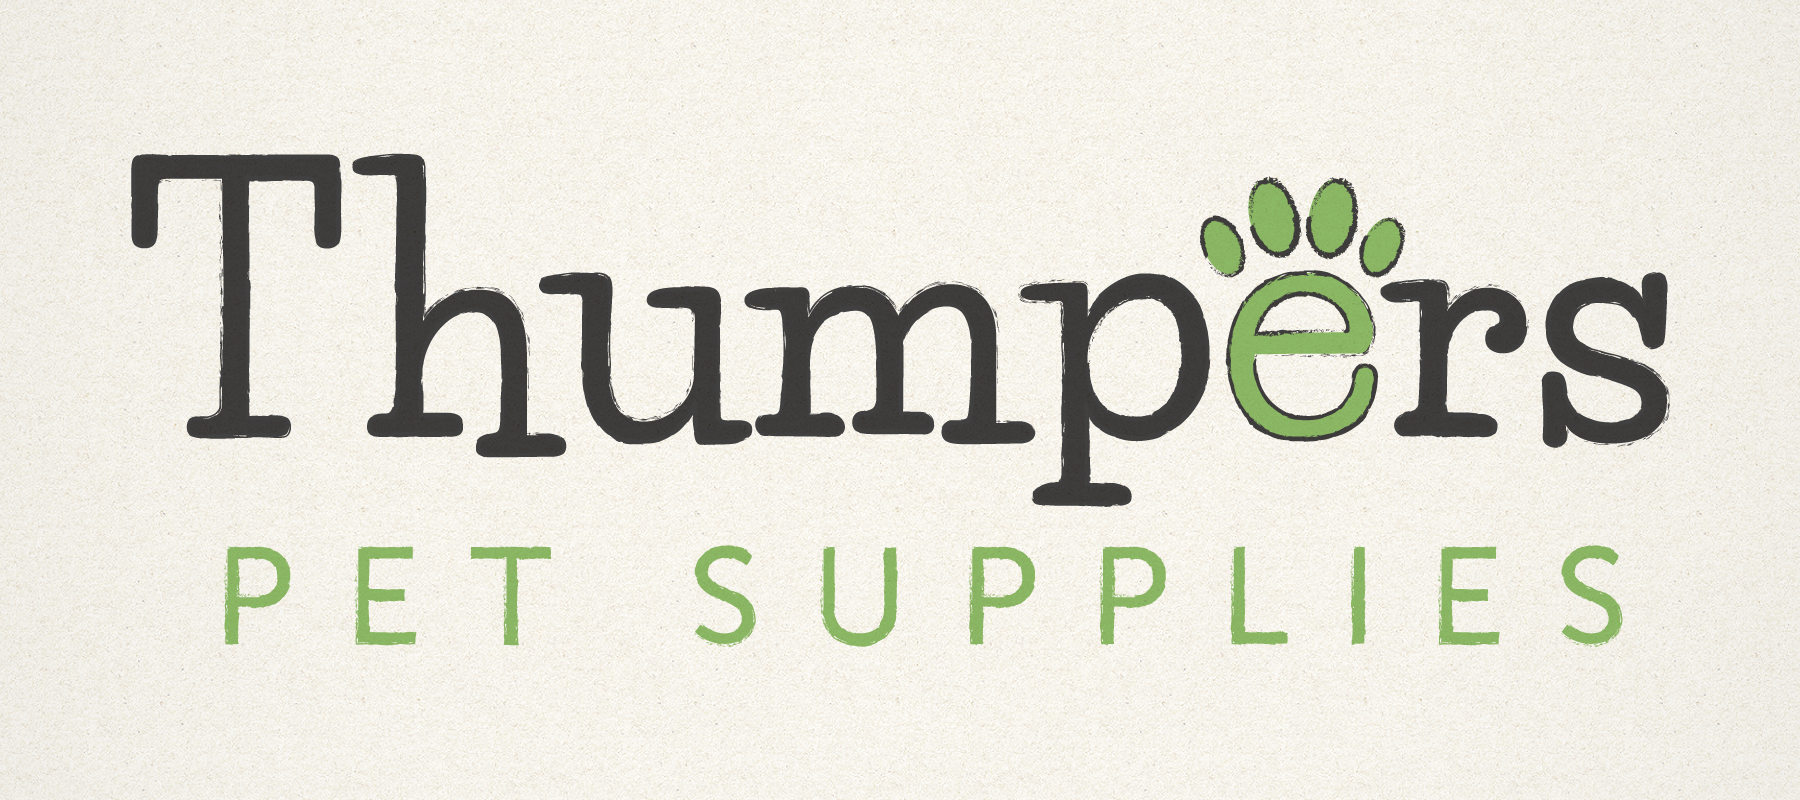 About Us Continued... - Thumper’s Pet Supplies